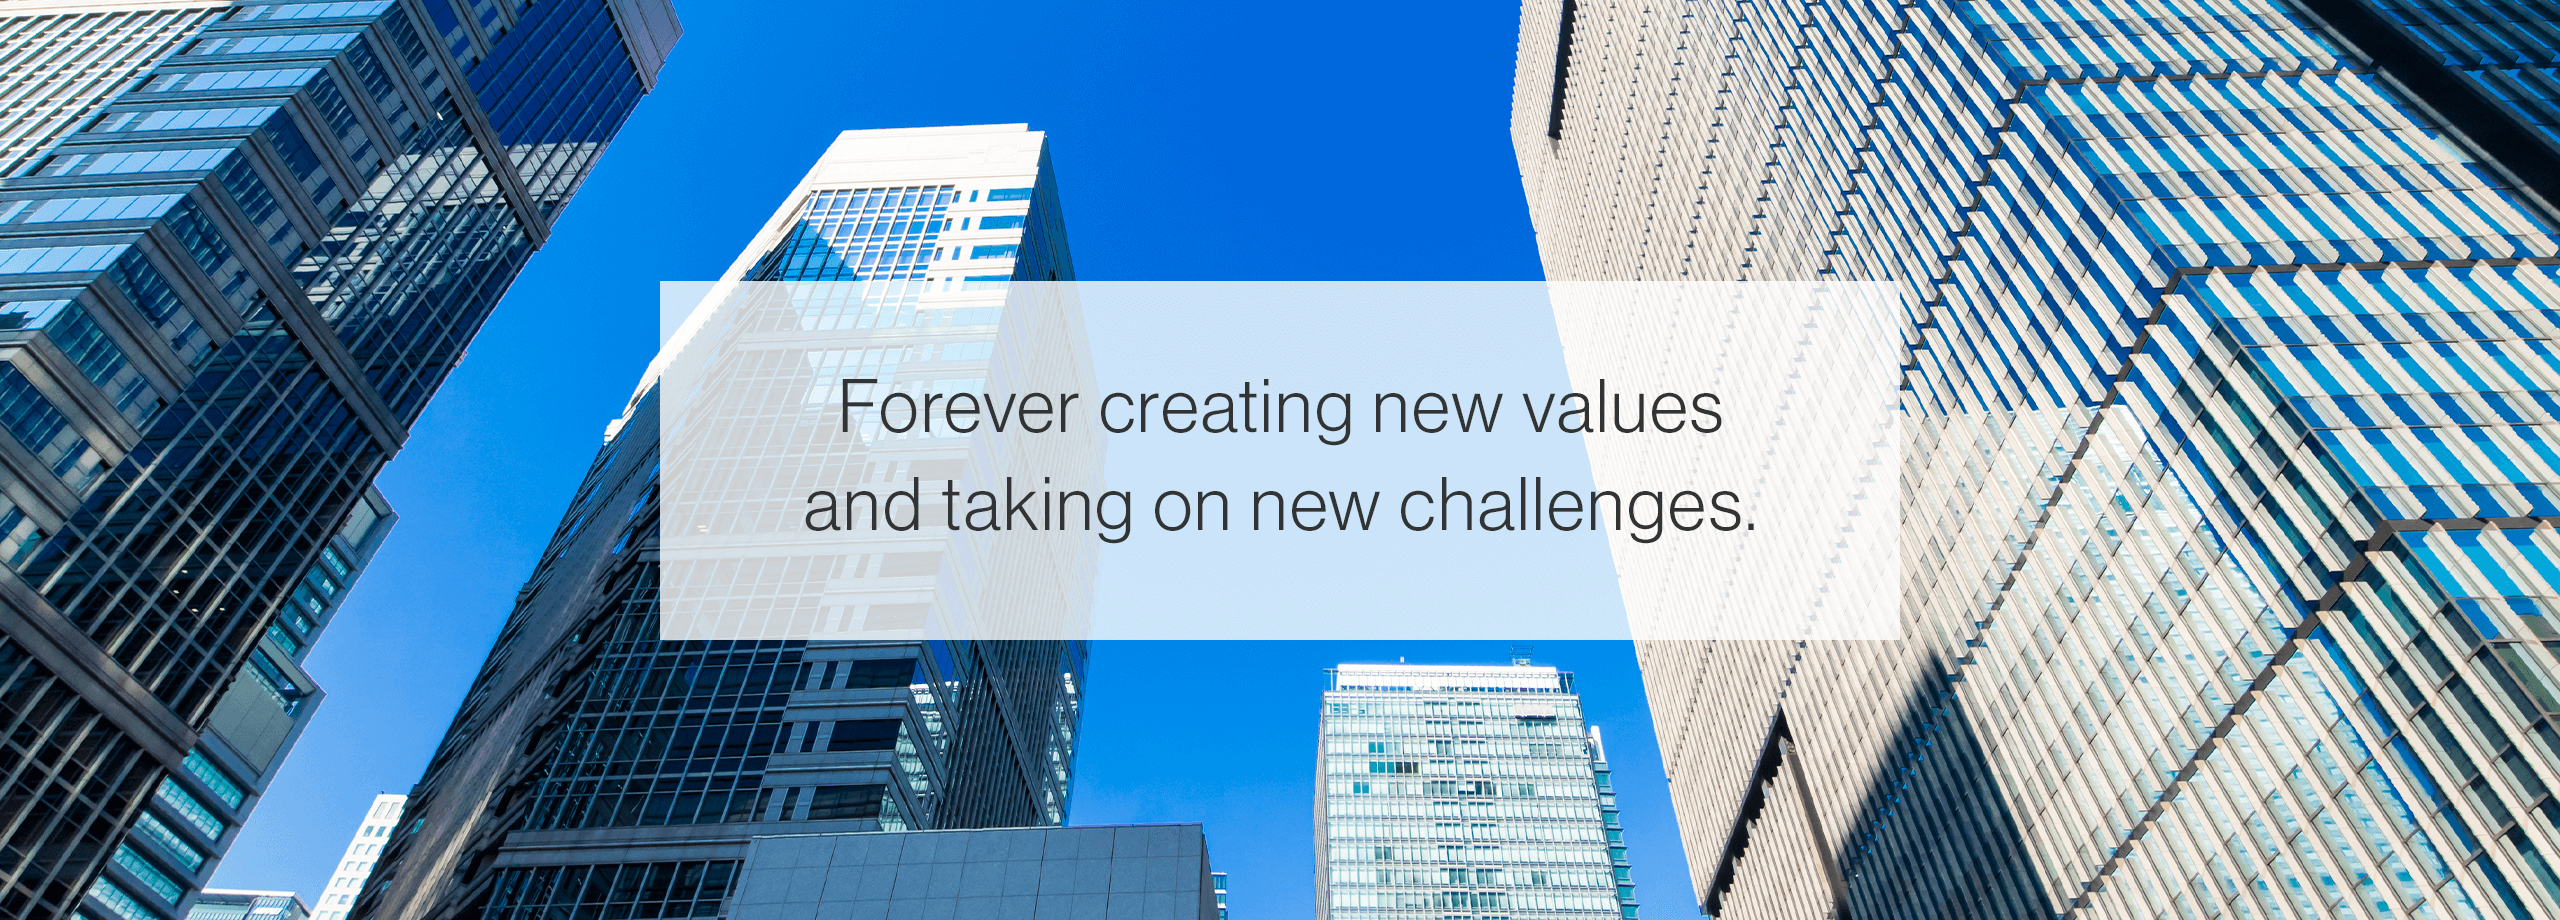 Forever creating new values and taking on new challenges.